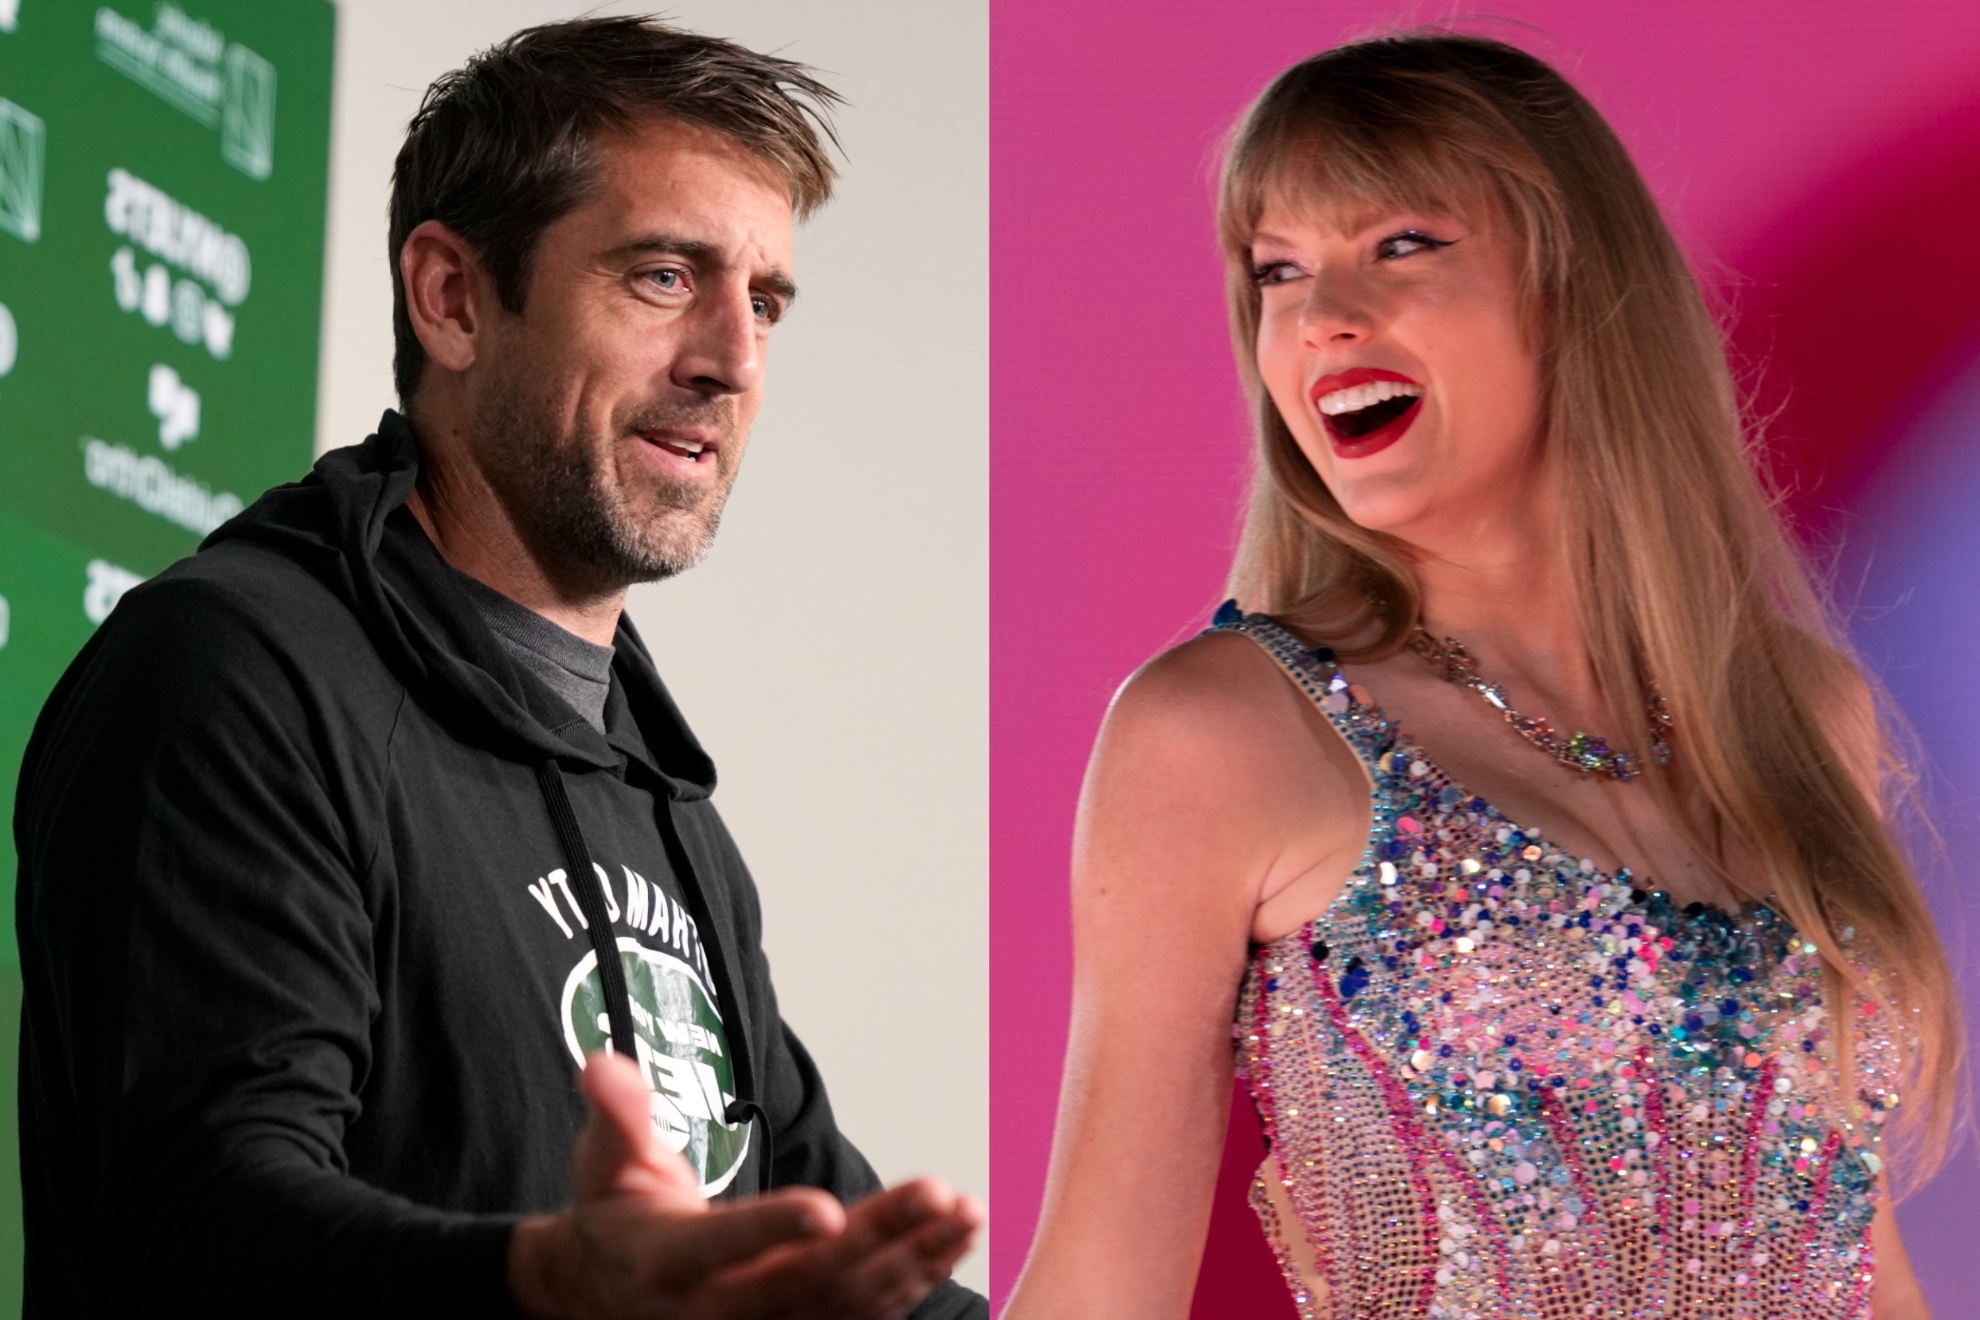 Jets QB Aaron Rodgers (left) is a great fan of singer/songwritter Taylor Swift (right).